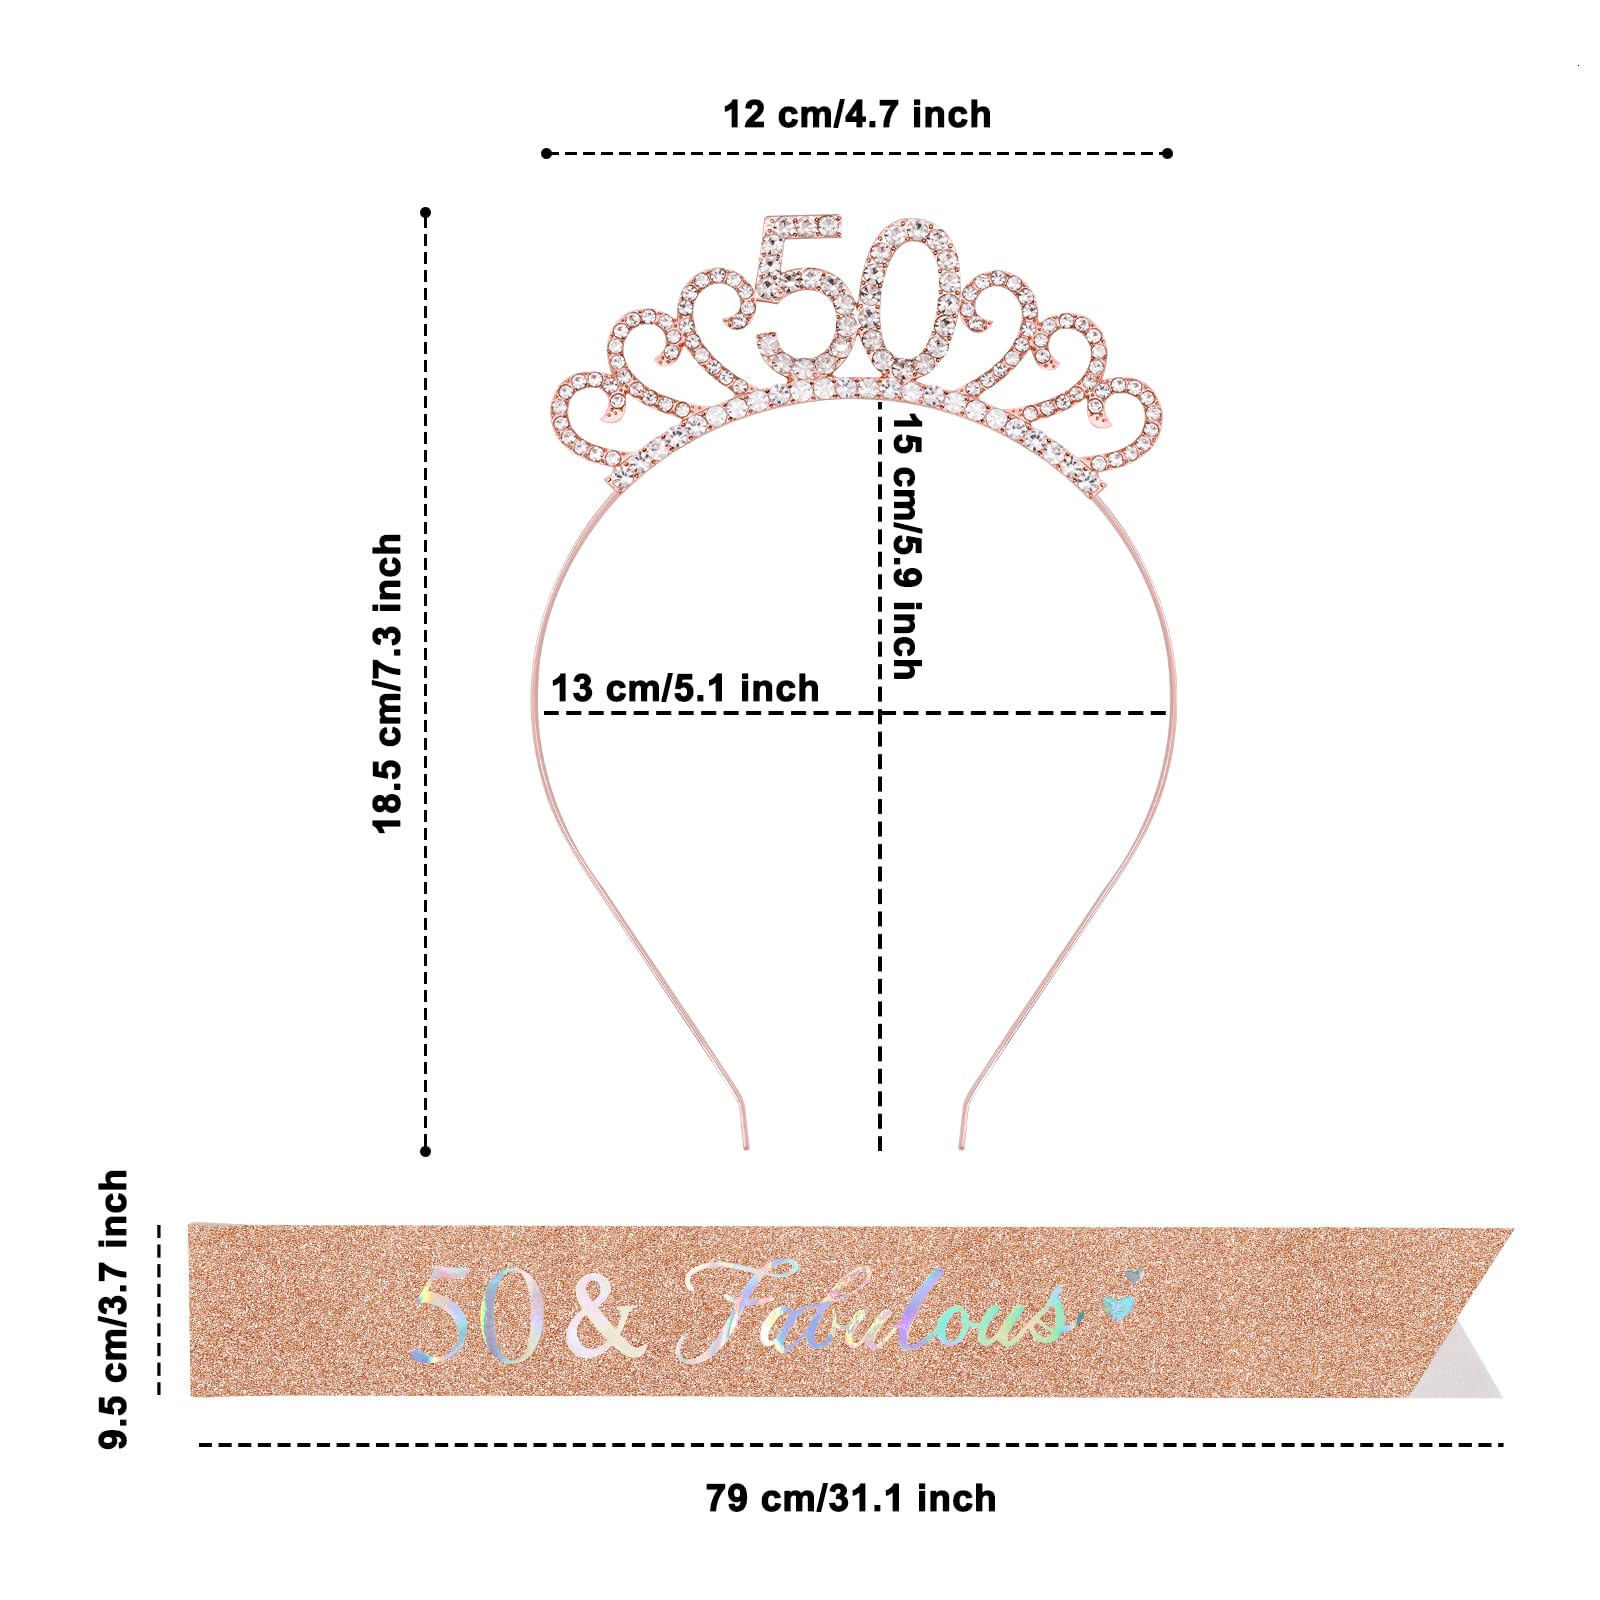 TOPWAYS 50th Birthday Sash and Tiara Set, Rose Gold 50 Glitter Crown Headband & Fabulous Sash Party Supplies 50th Birthday Gifts for Women Girls Her 50th Birthday Decorations (50 Fabulous, Rose Gold)